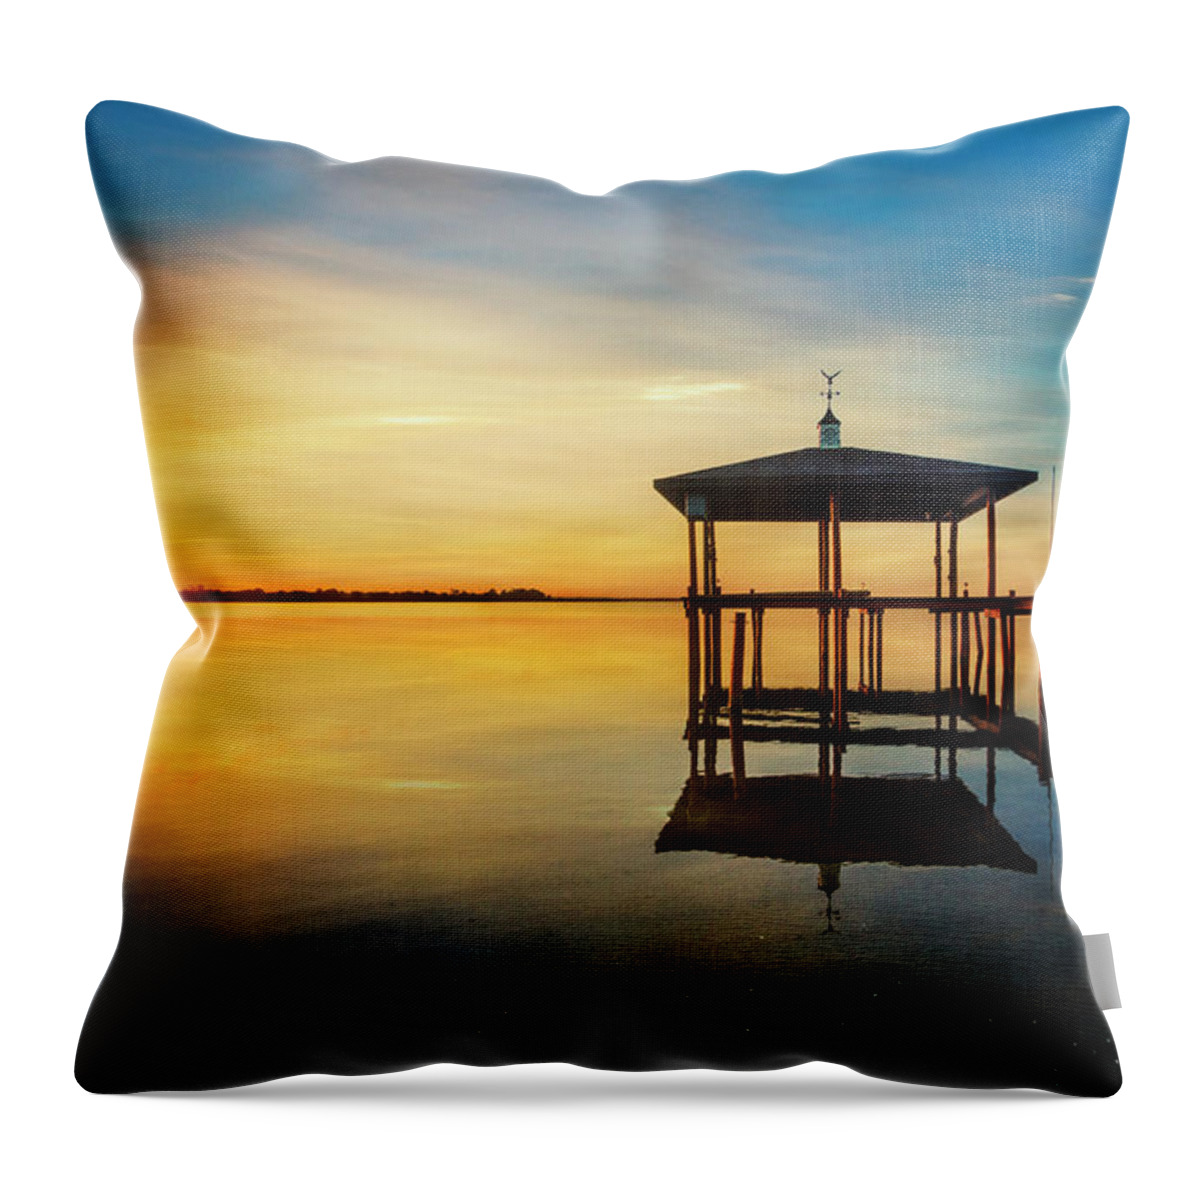 Clouds Throw Pillow featuring the photograph A Beautiful Start by Debra and Dave Vanderlaan